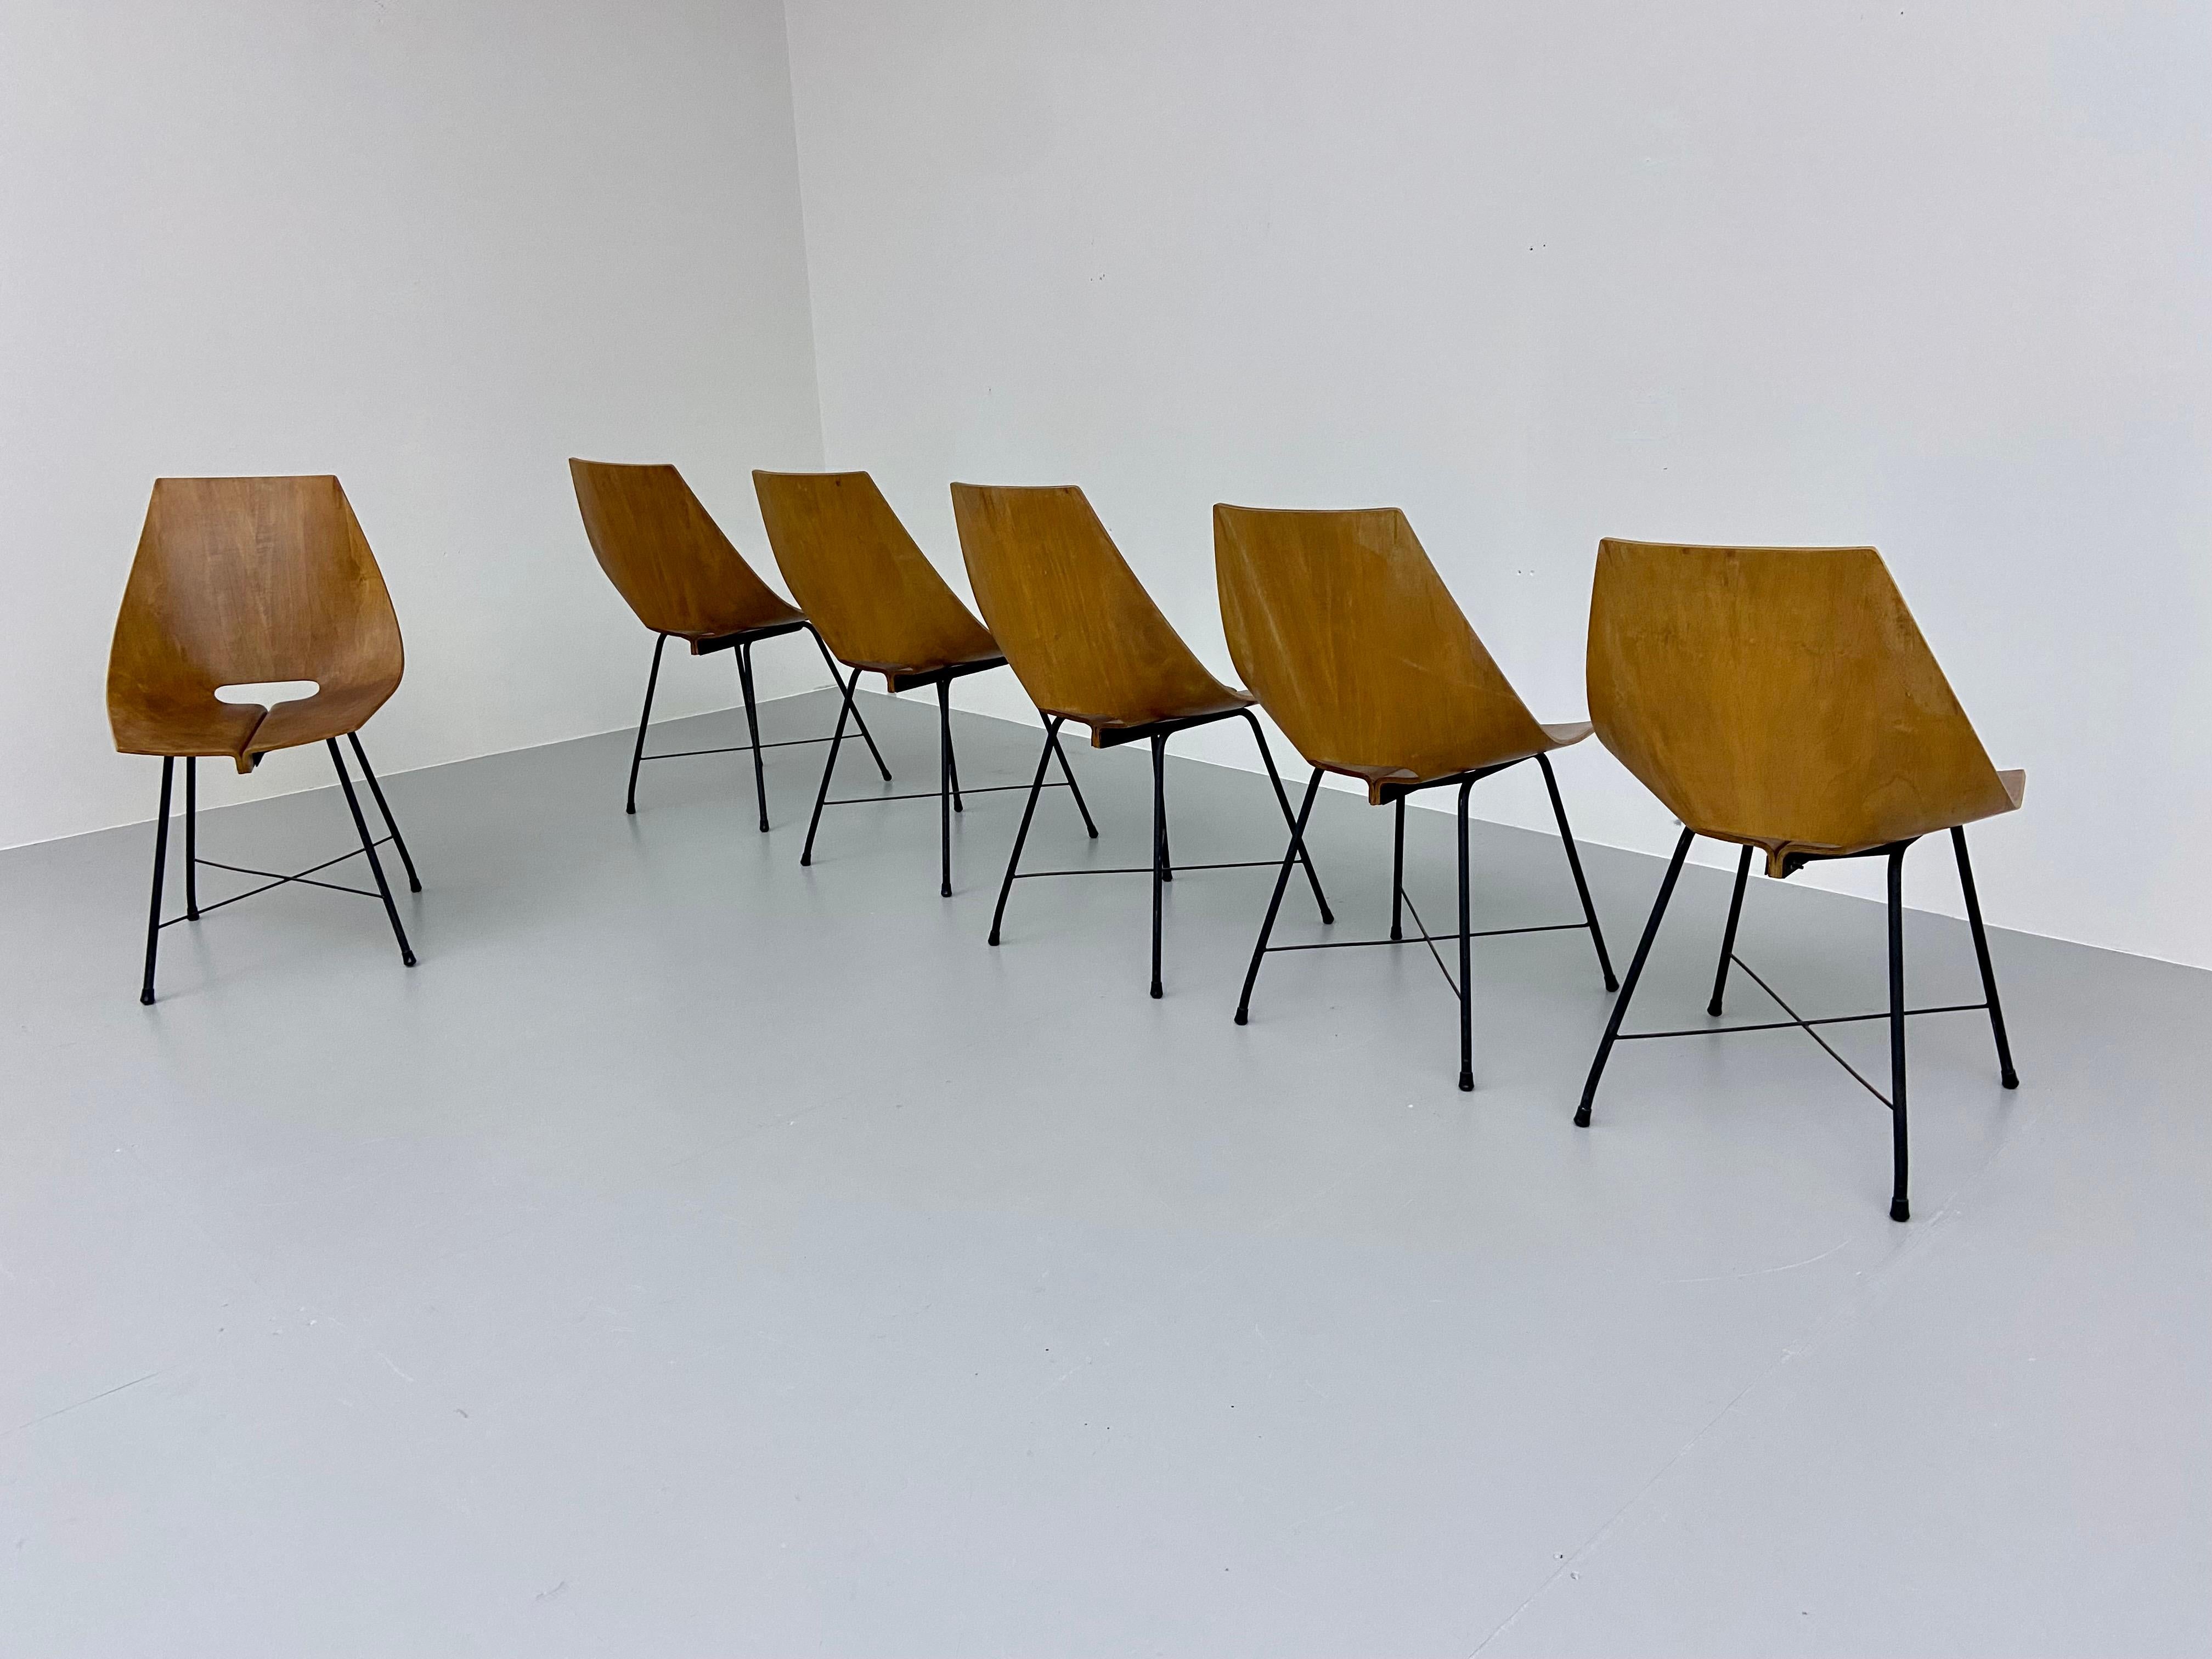 Set of 6 Dining Room Chairs by Carlo Ratti in Bended Wood and Metal, Italy, 1954 4